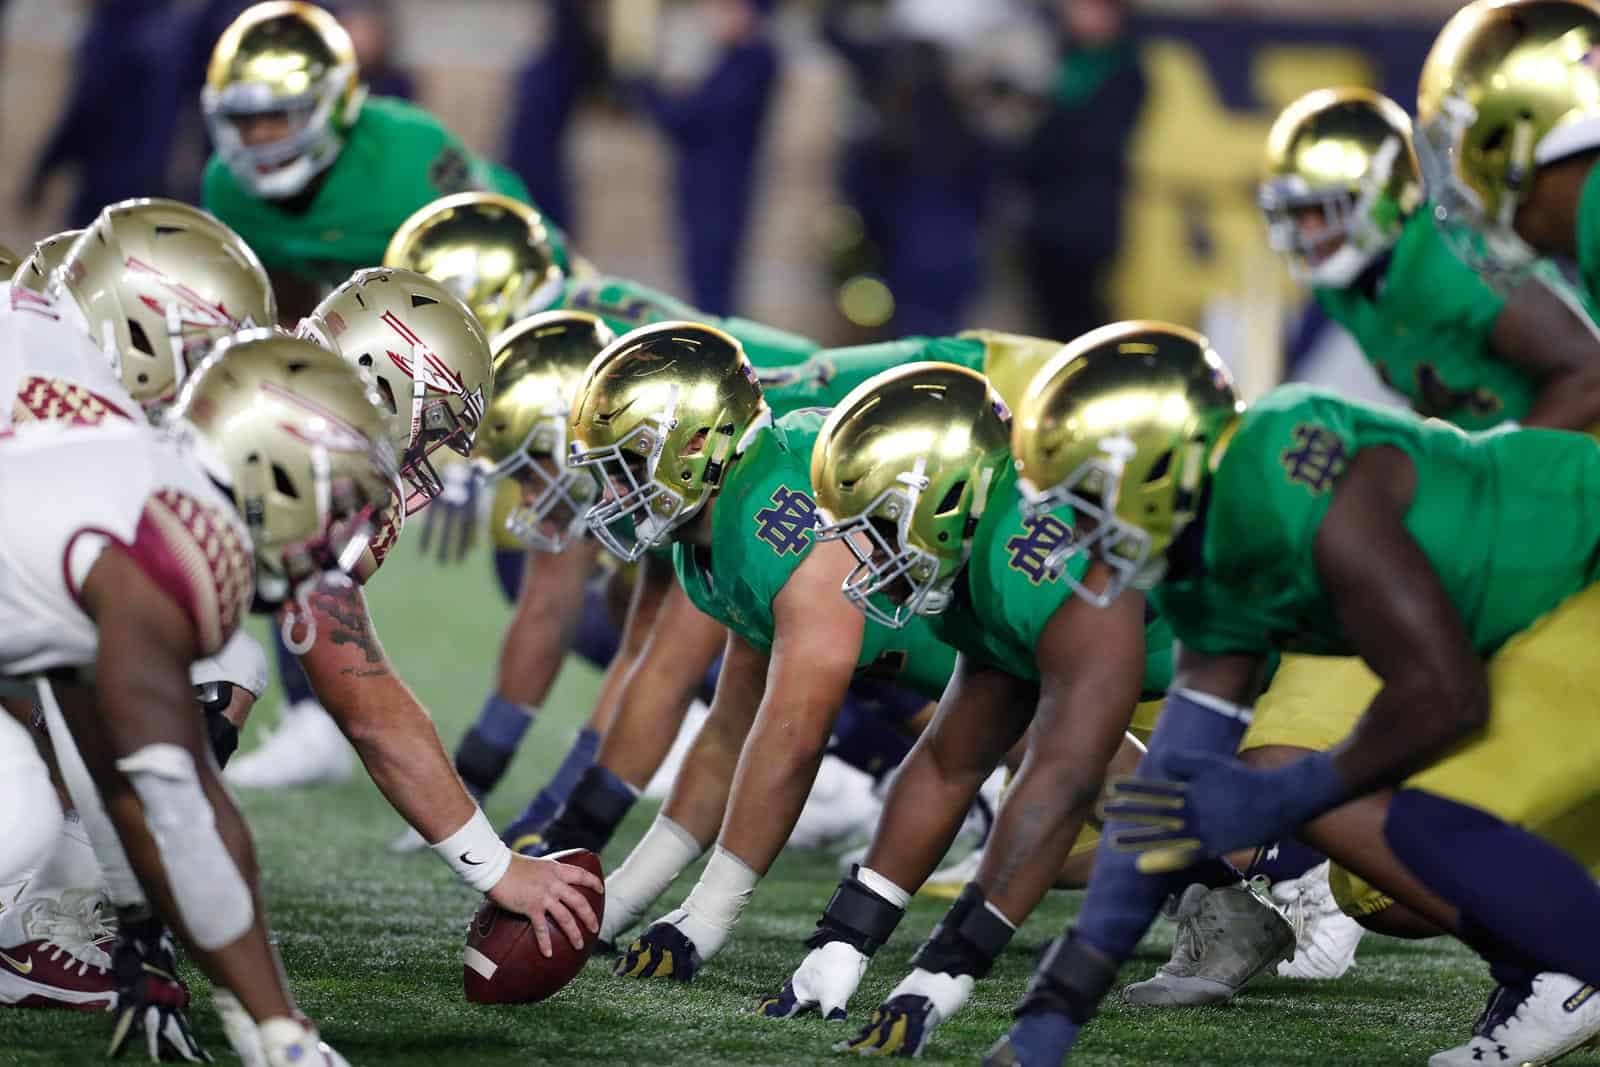 2021 Notre Dame-Florida State game moved from Labor Day to Sunday